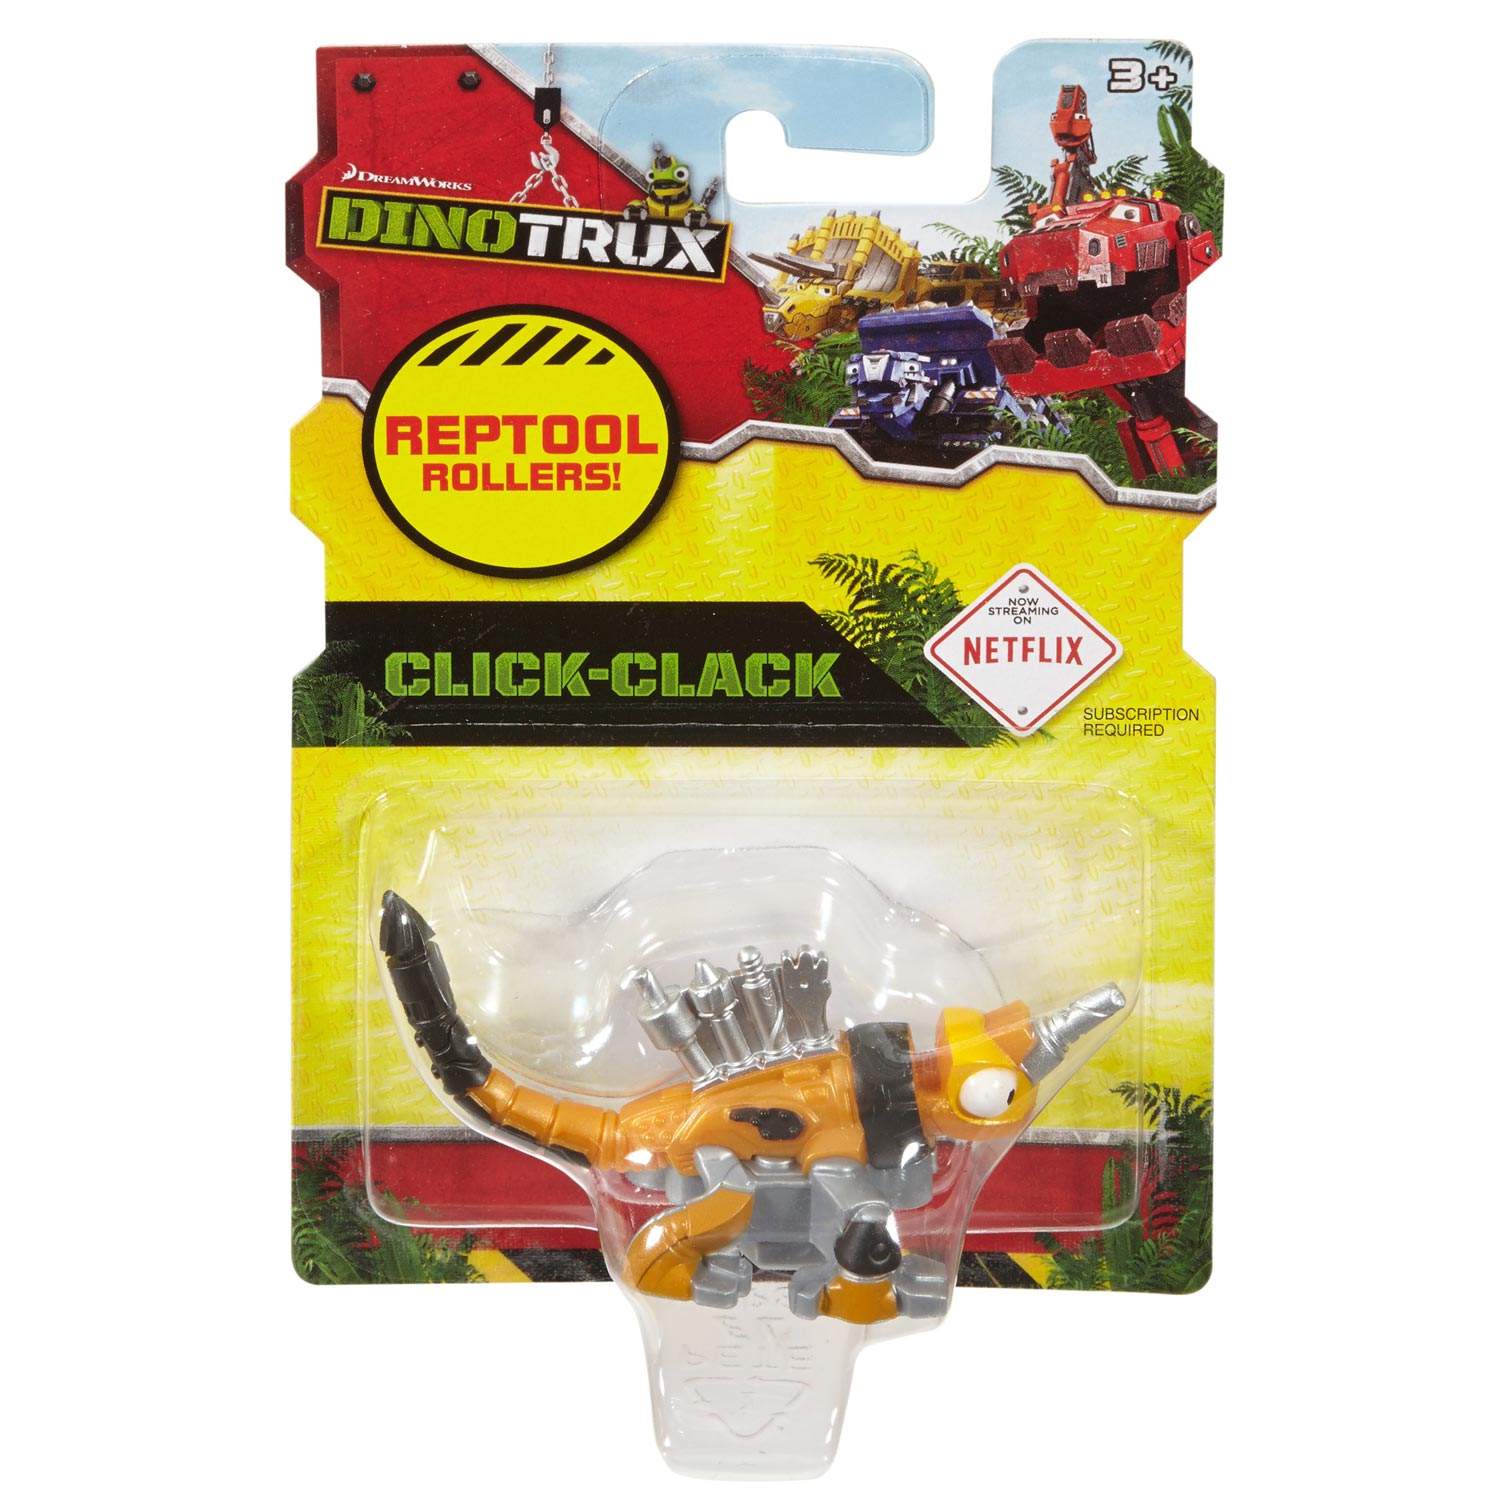 Dinotrux Reptool Rollers - Click-Clack